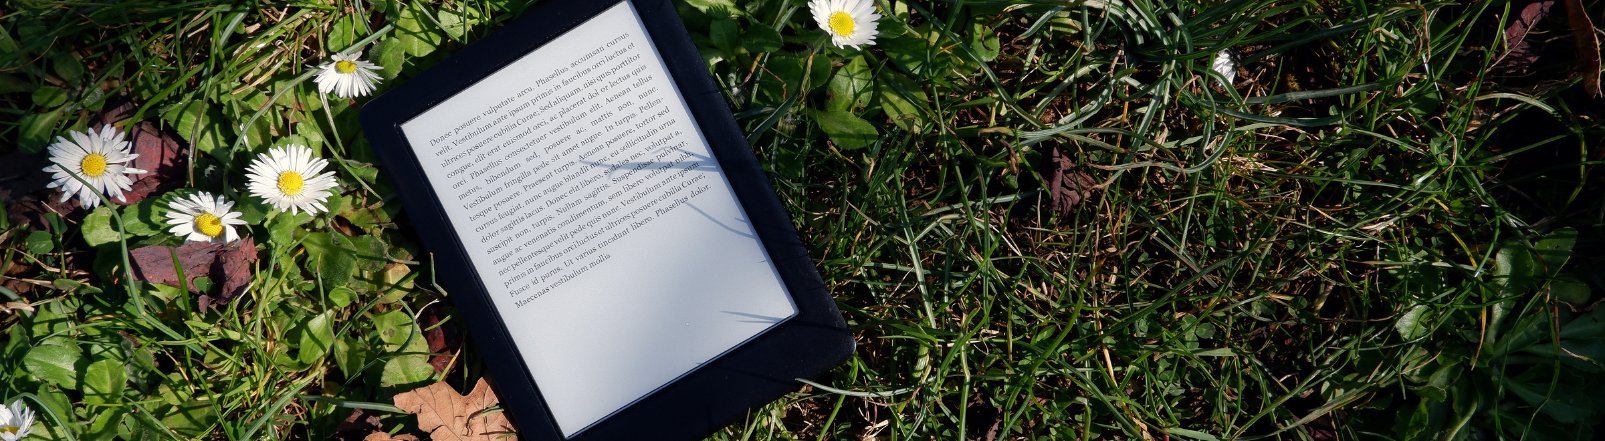 E-reader in the grass with daisies growing nearby